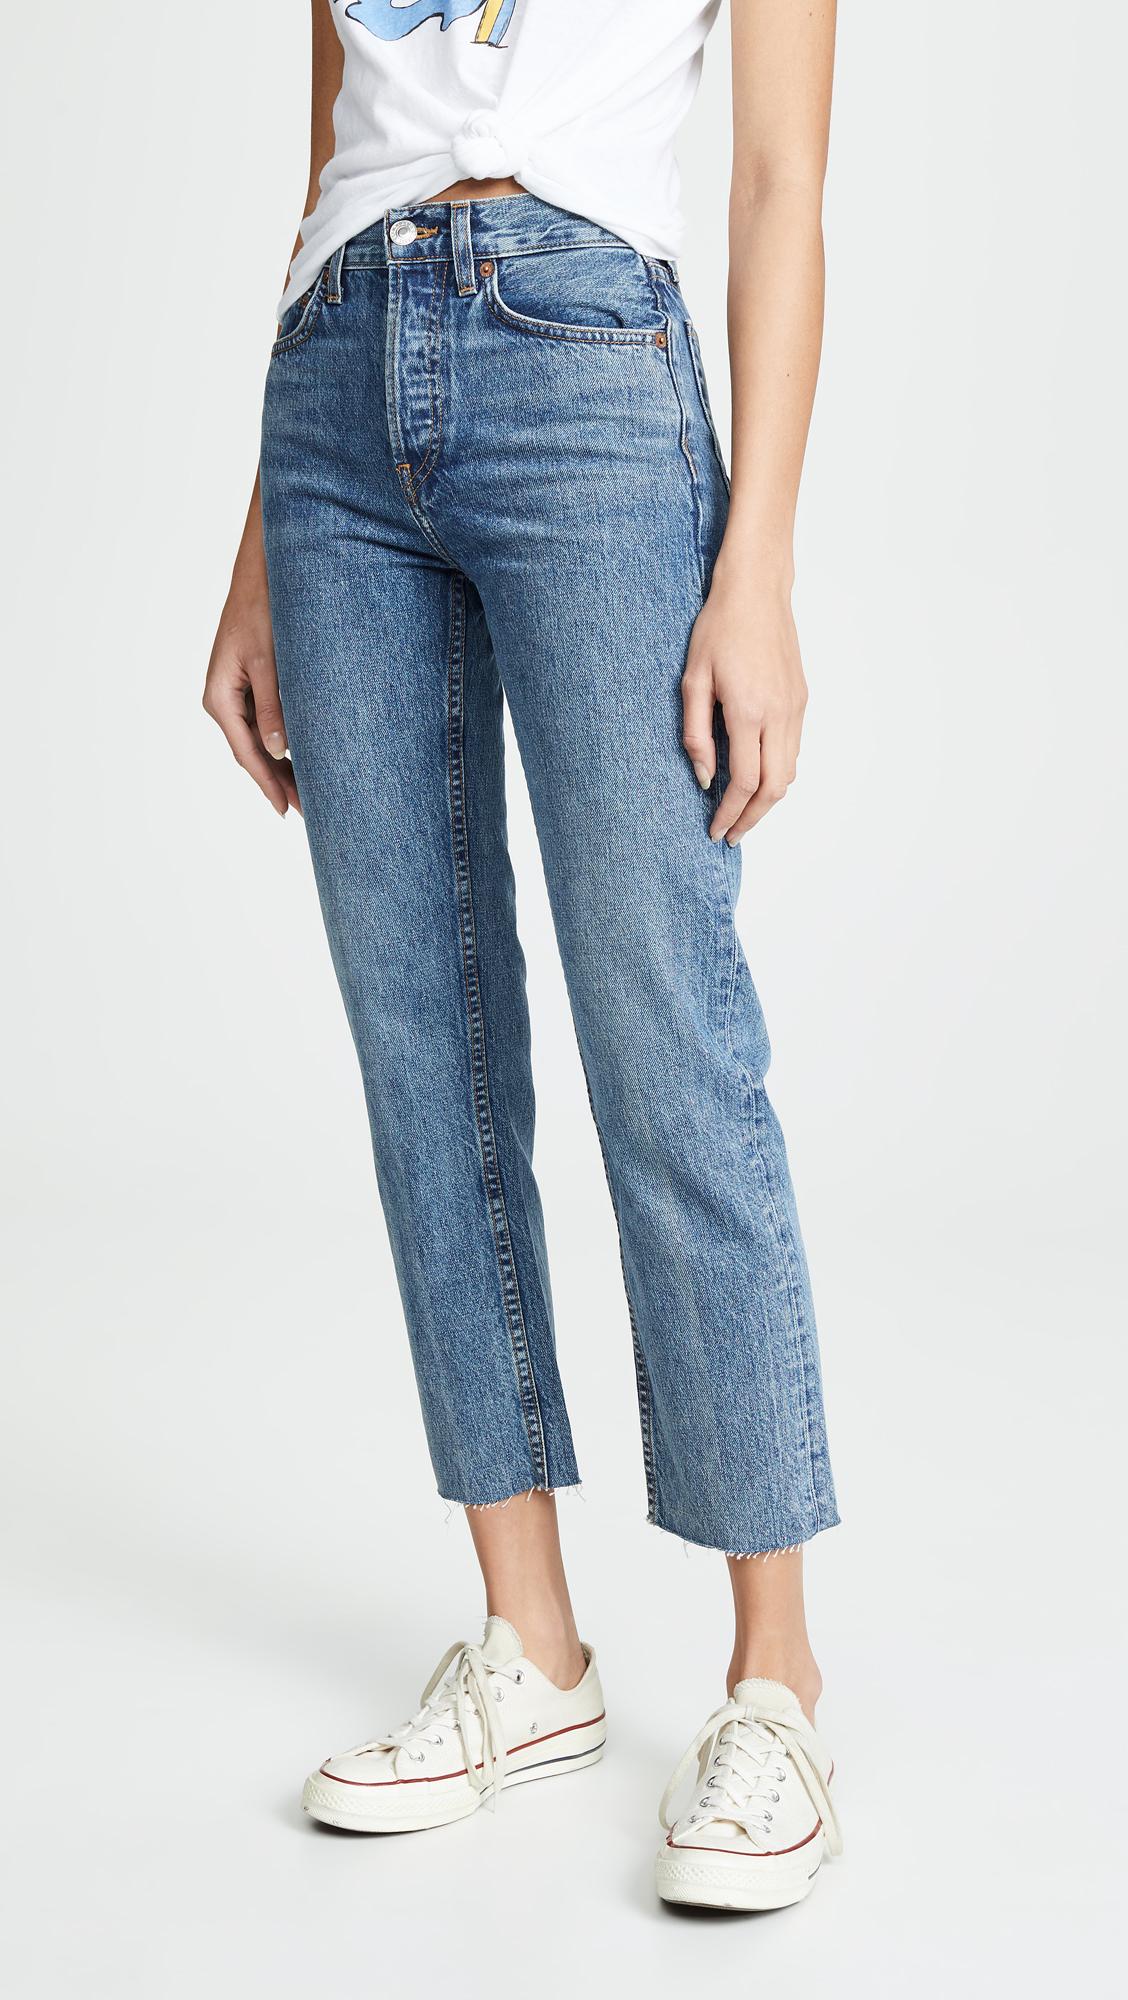 RE/DONE Denim High Rise Rigid Stove Pipe Jeans in Blue - Lyst